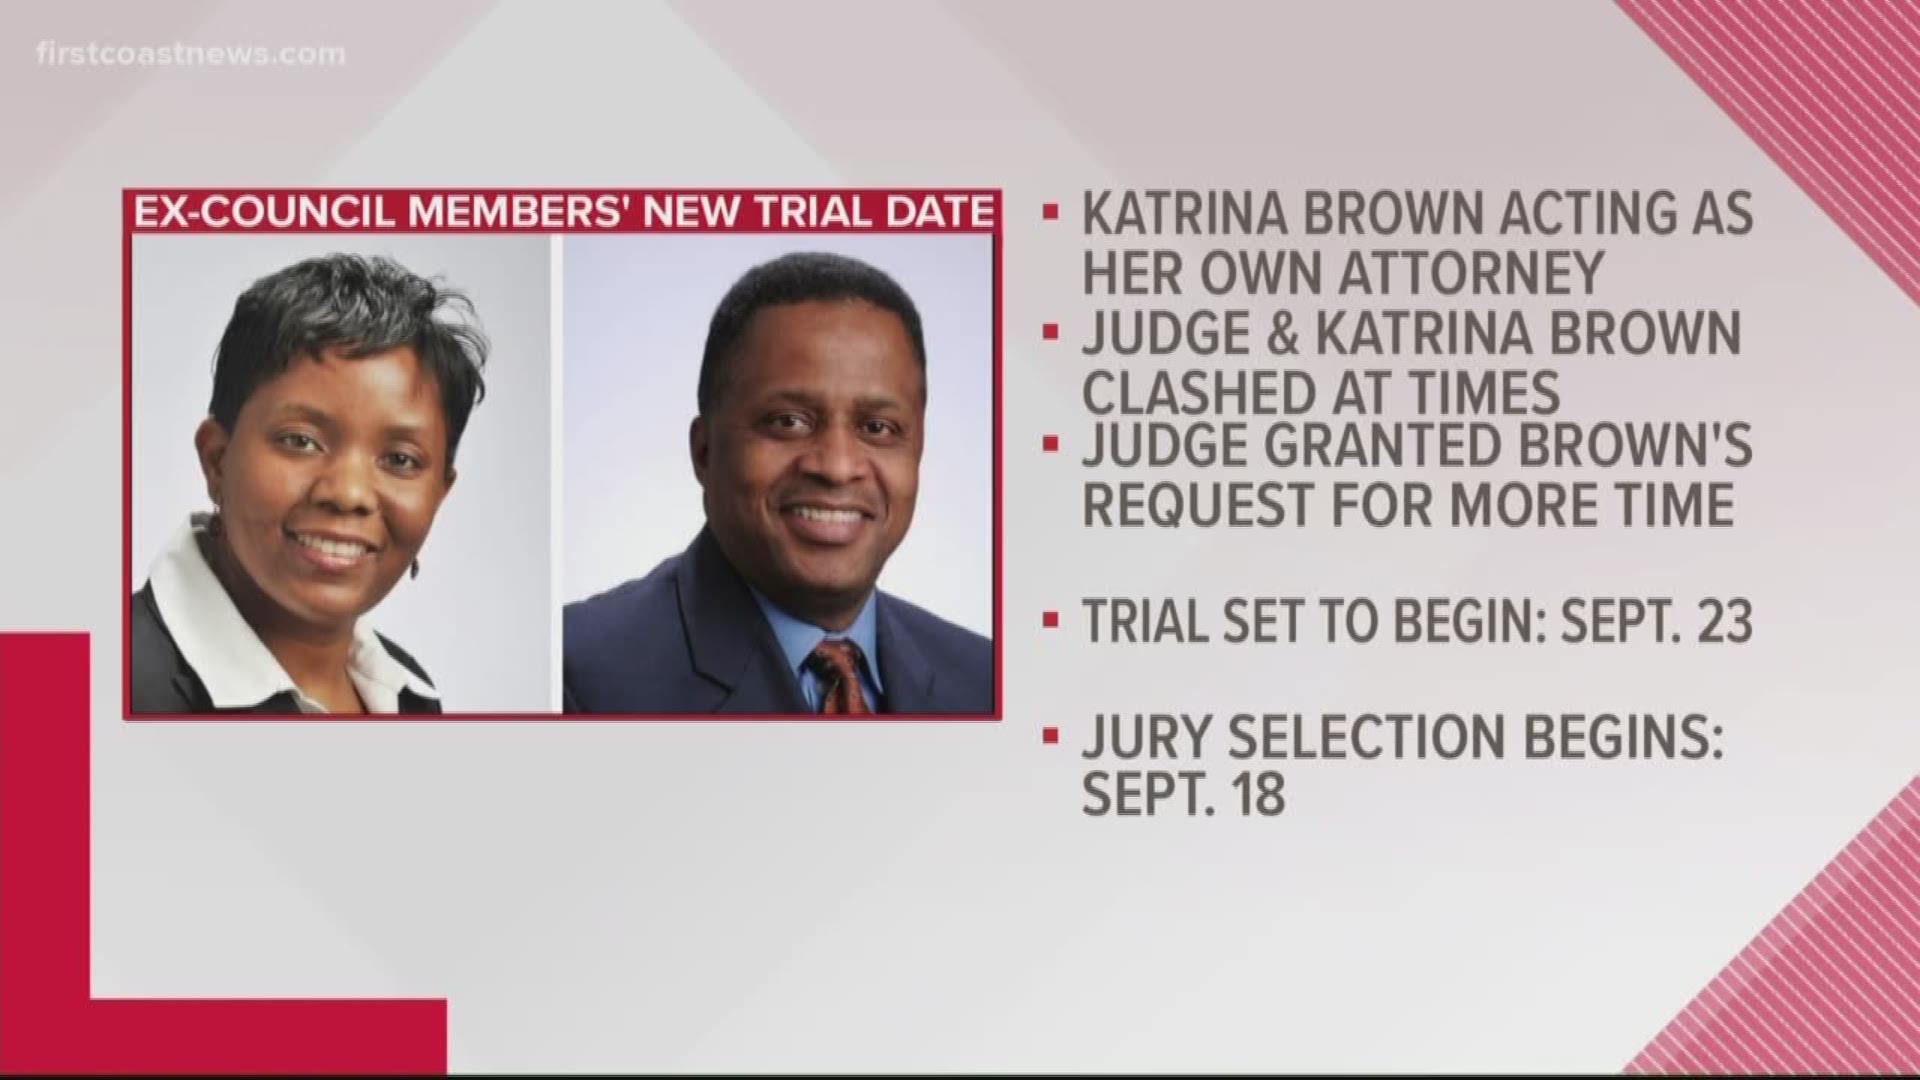 Katrina Brown and Reggie Brown are accused of conspiracy and fraud. Reggie Brown's motion was to sever ties from her trial now that she is representing herself.